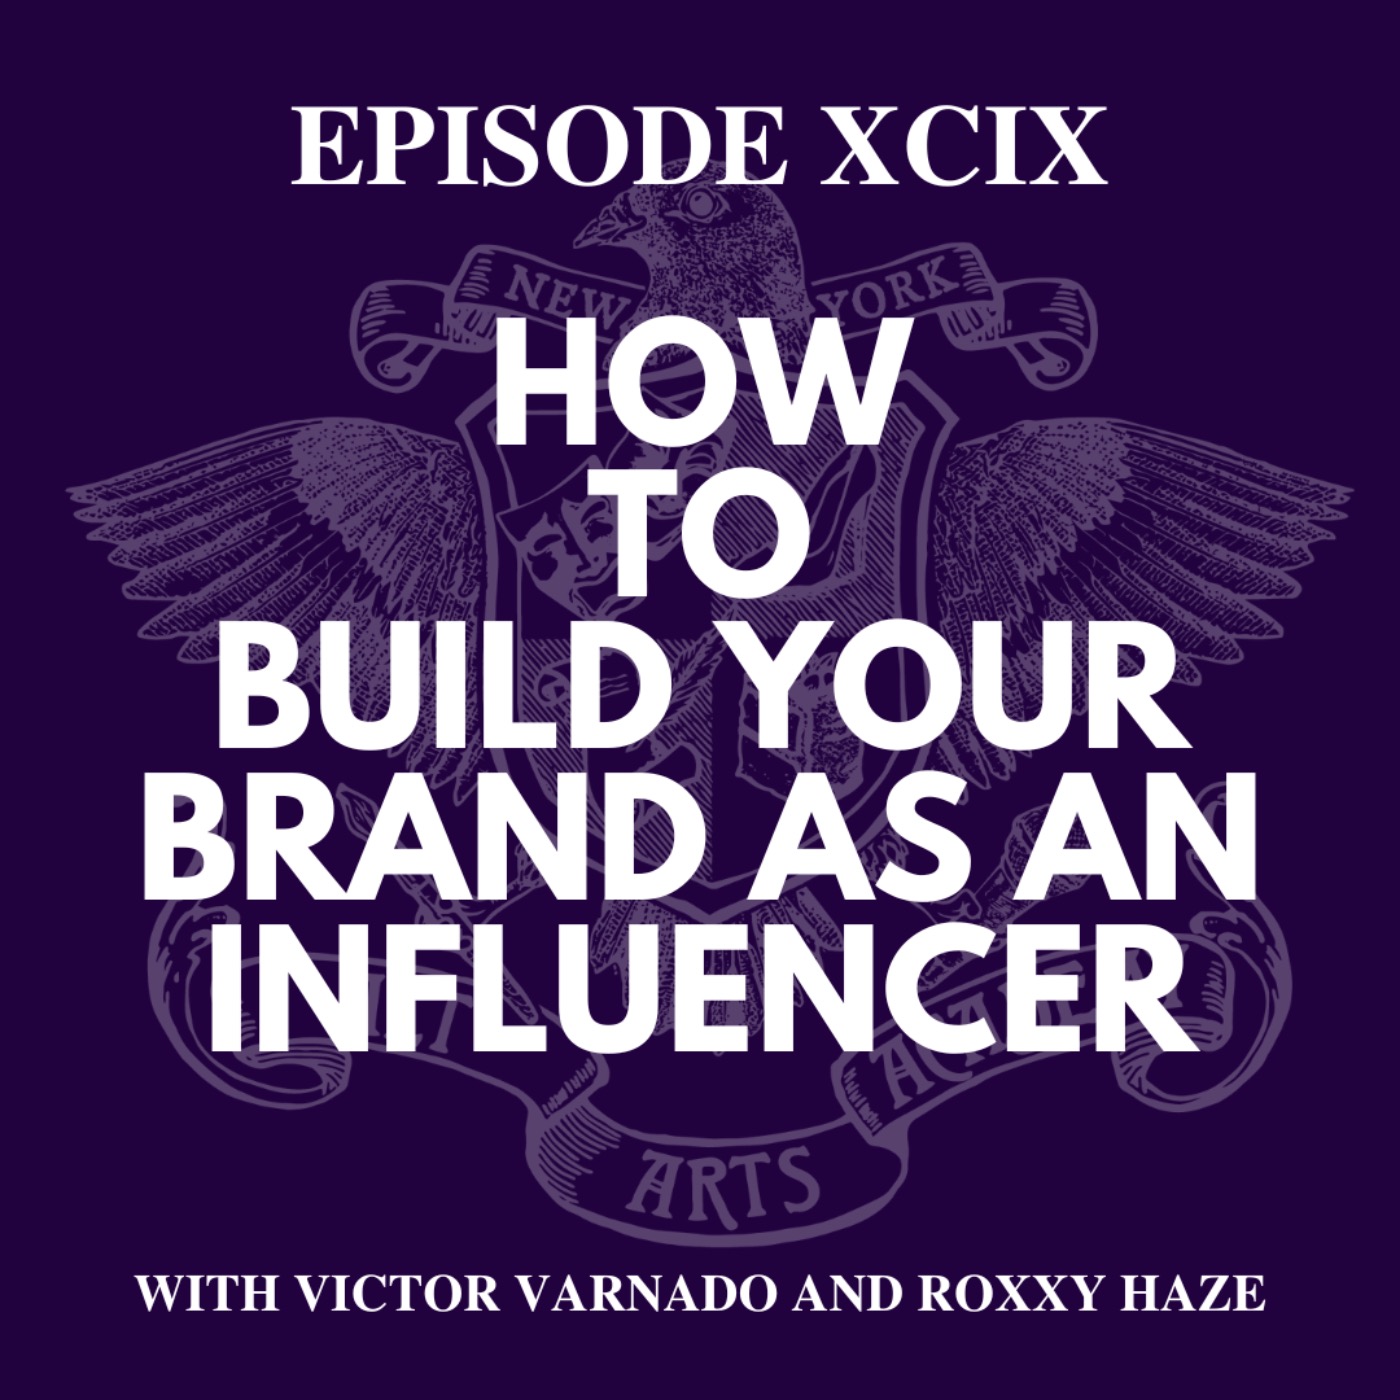 How To Build Your Brand as an Influencer